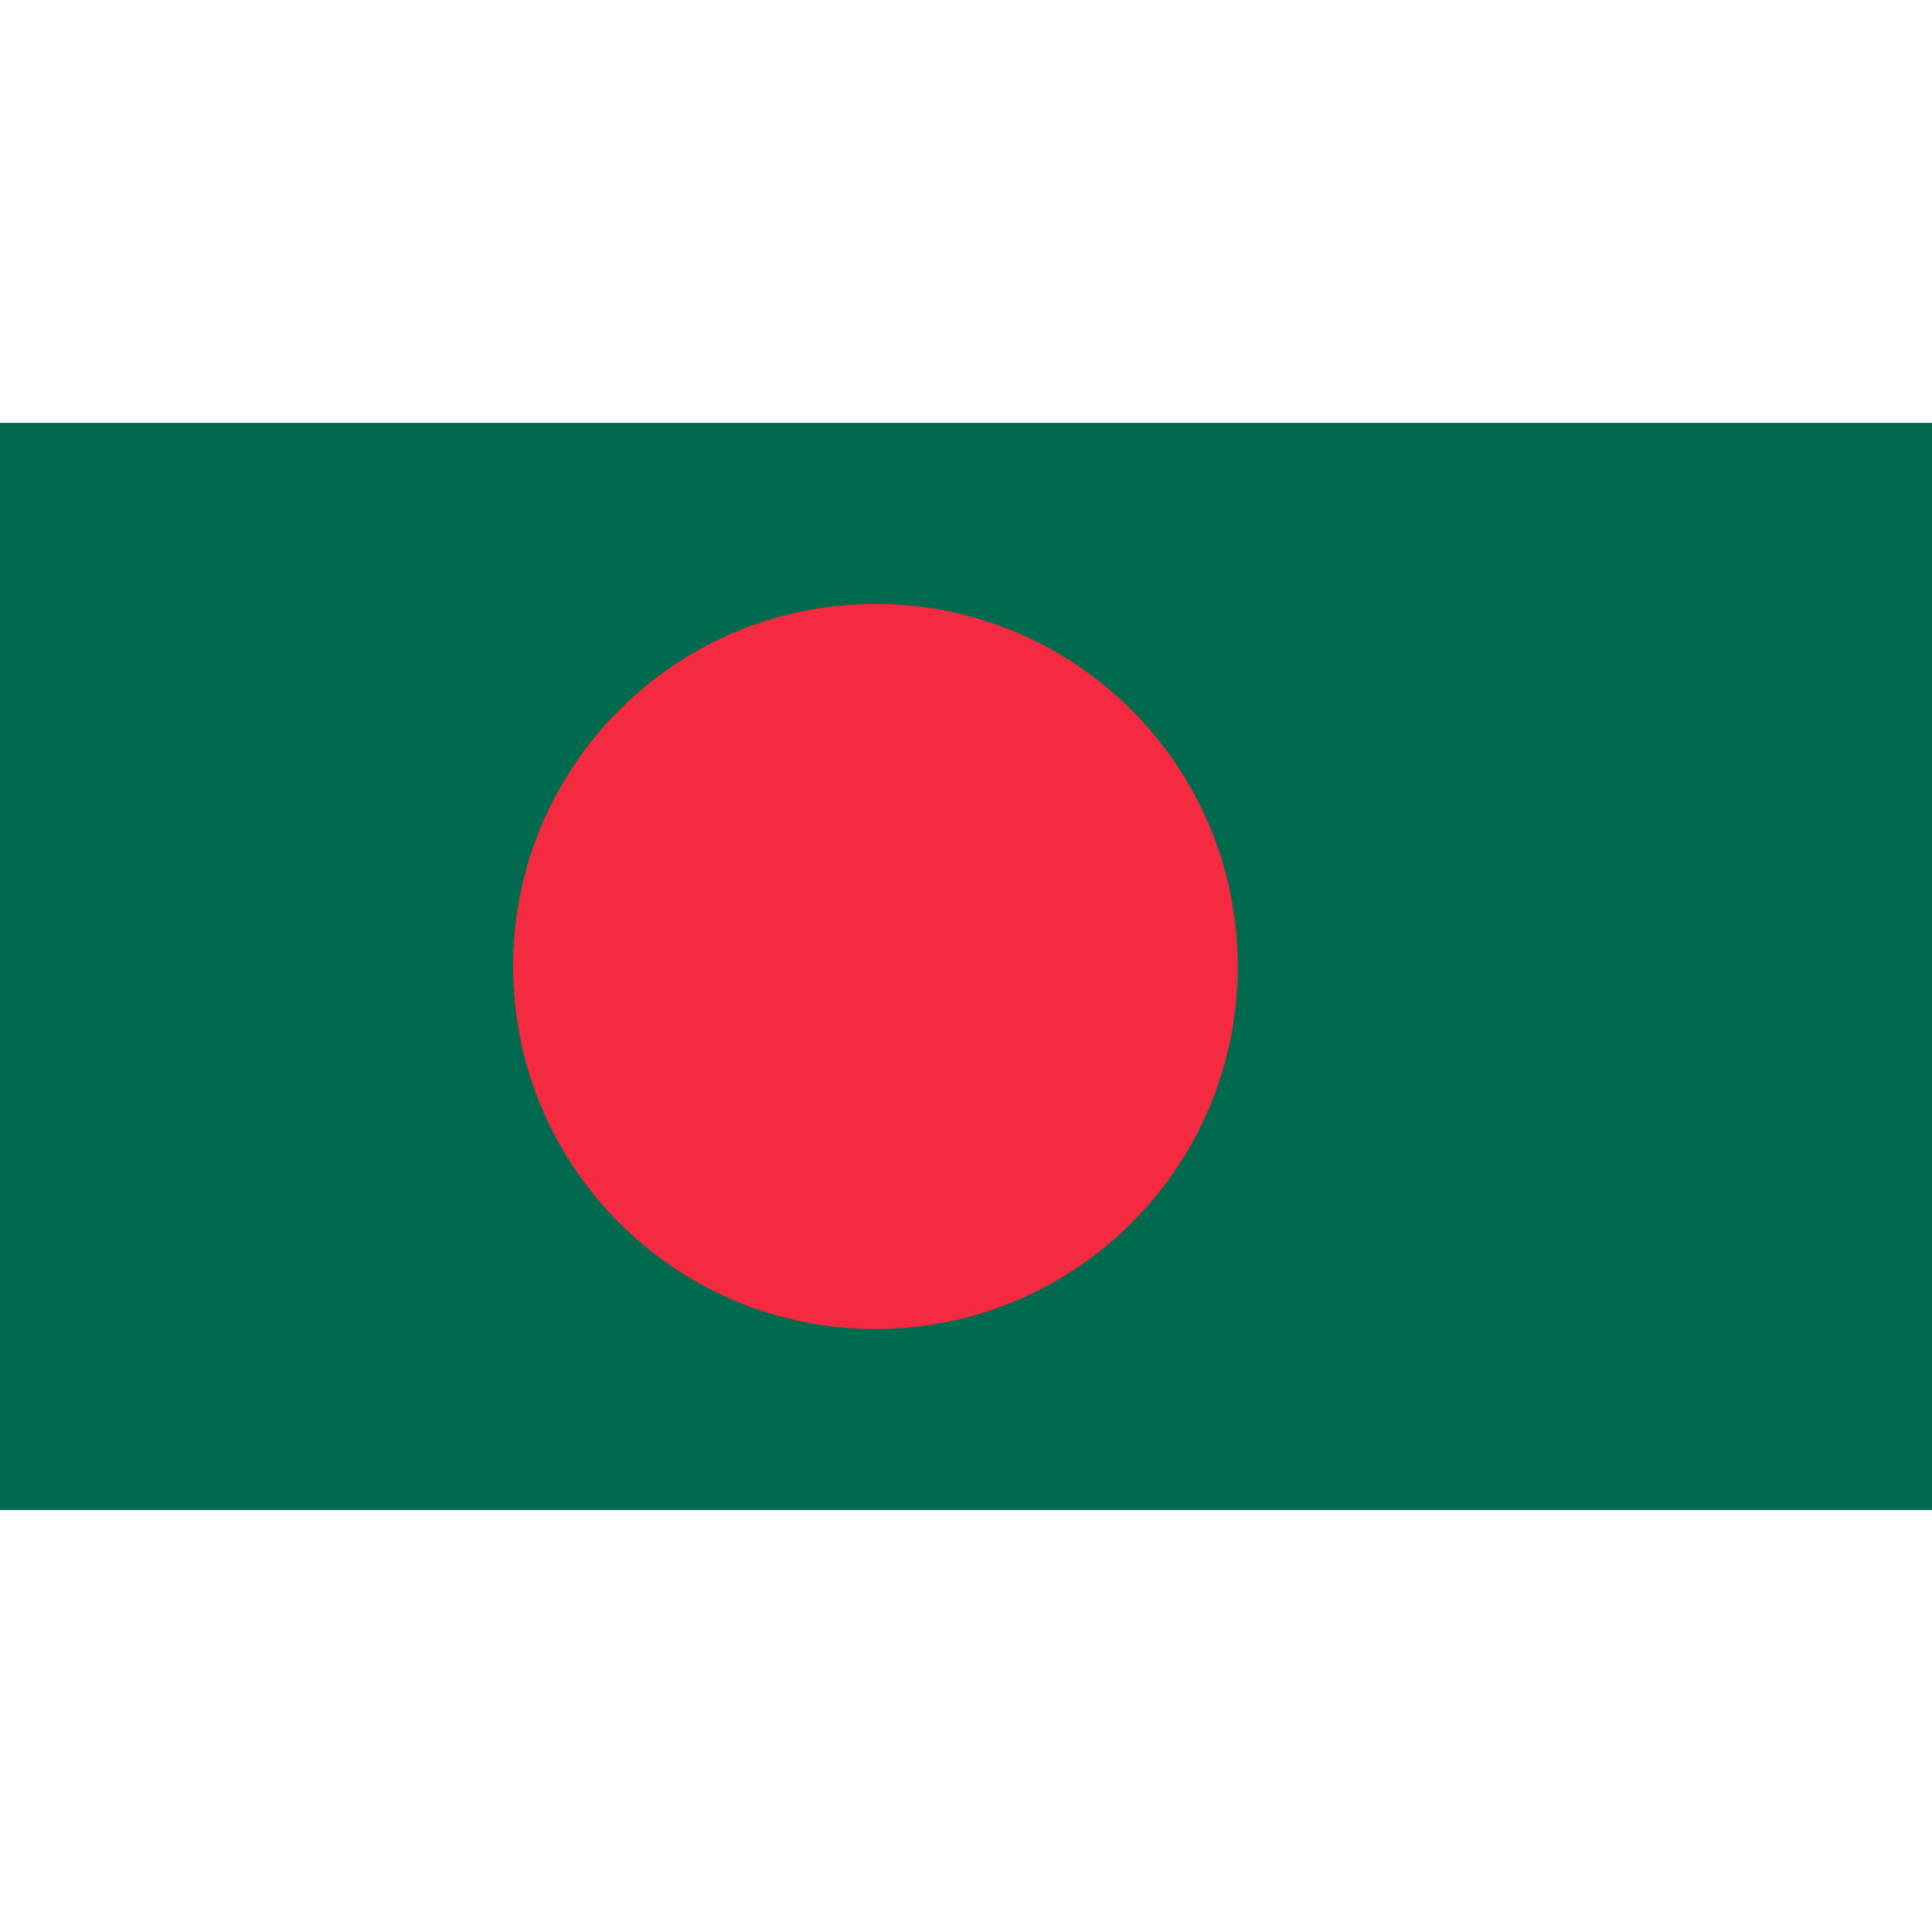 The flag of Bangladesh has a large red disc in the centre of a dark green rectangular background.